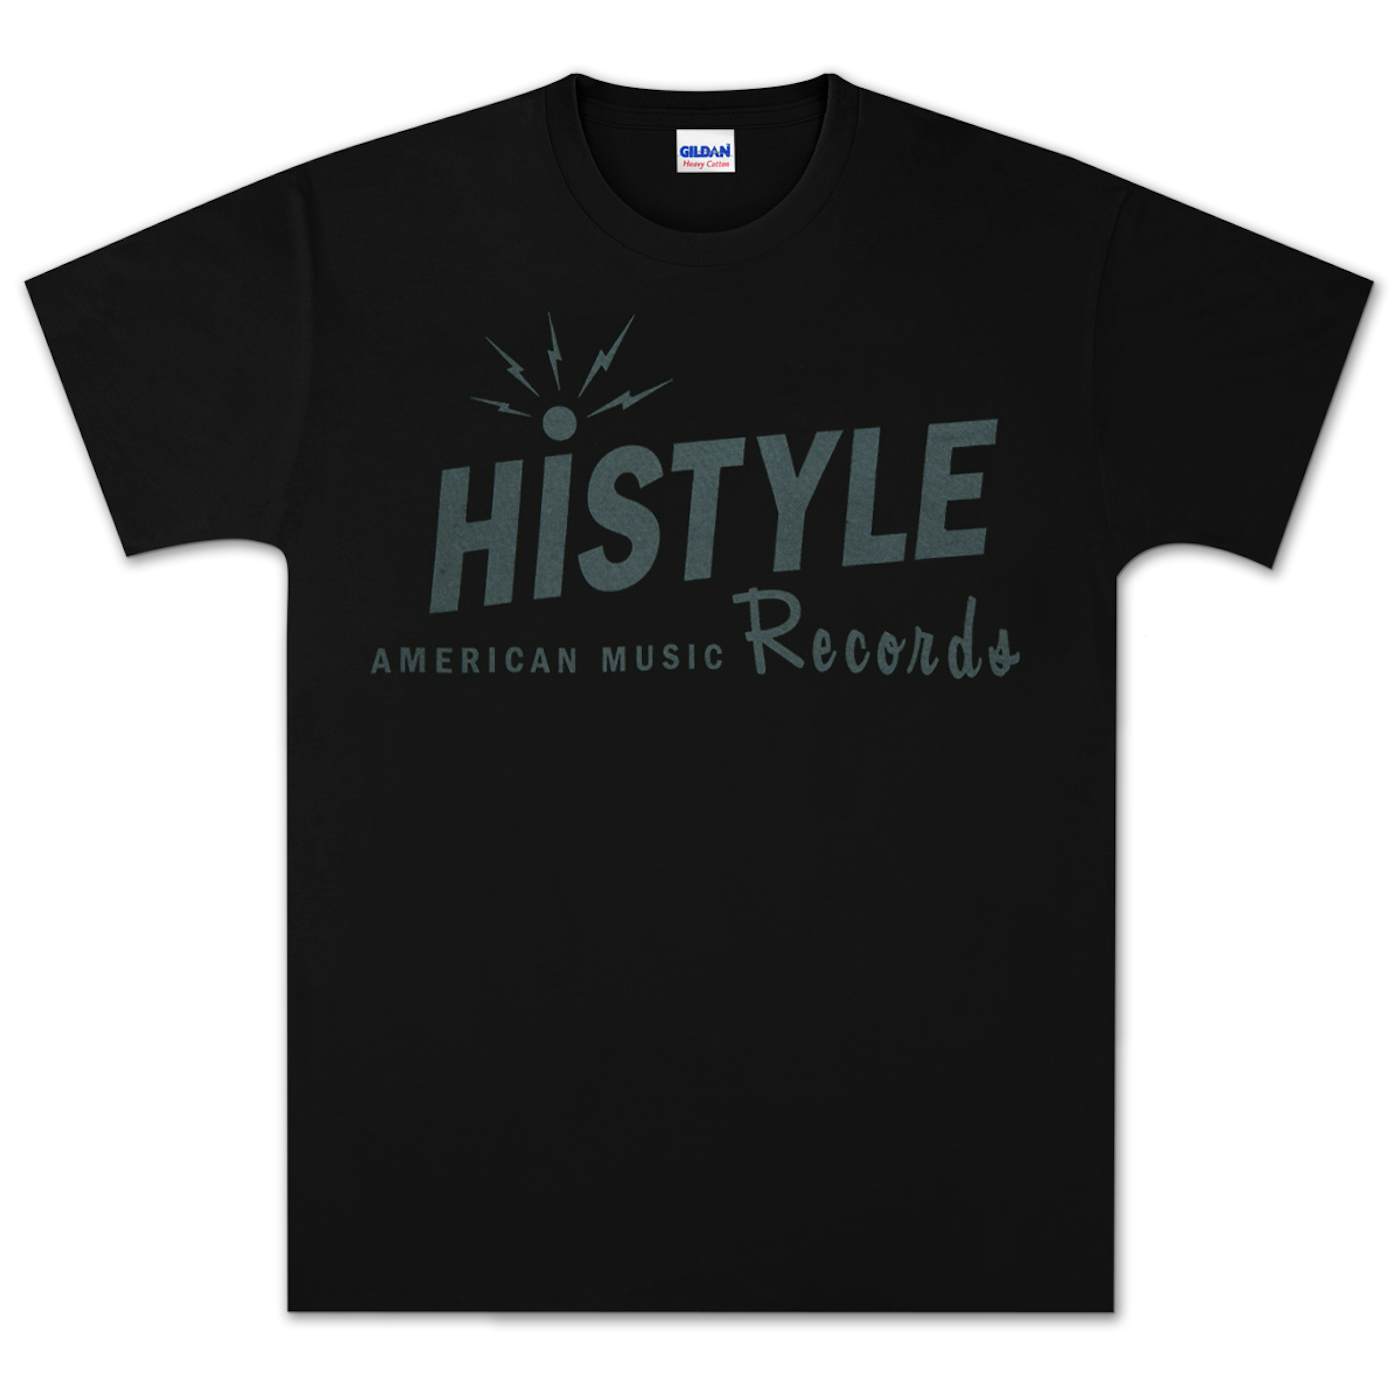 JD McPherson "Histyle American Music Records" T-Shirt